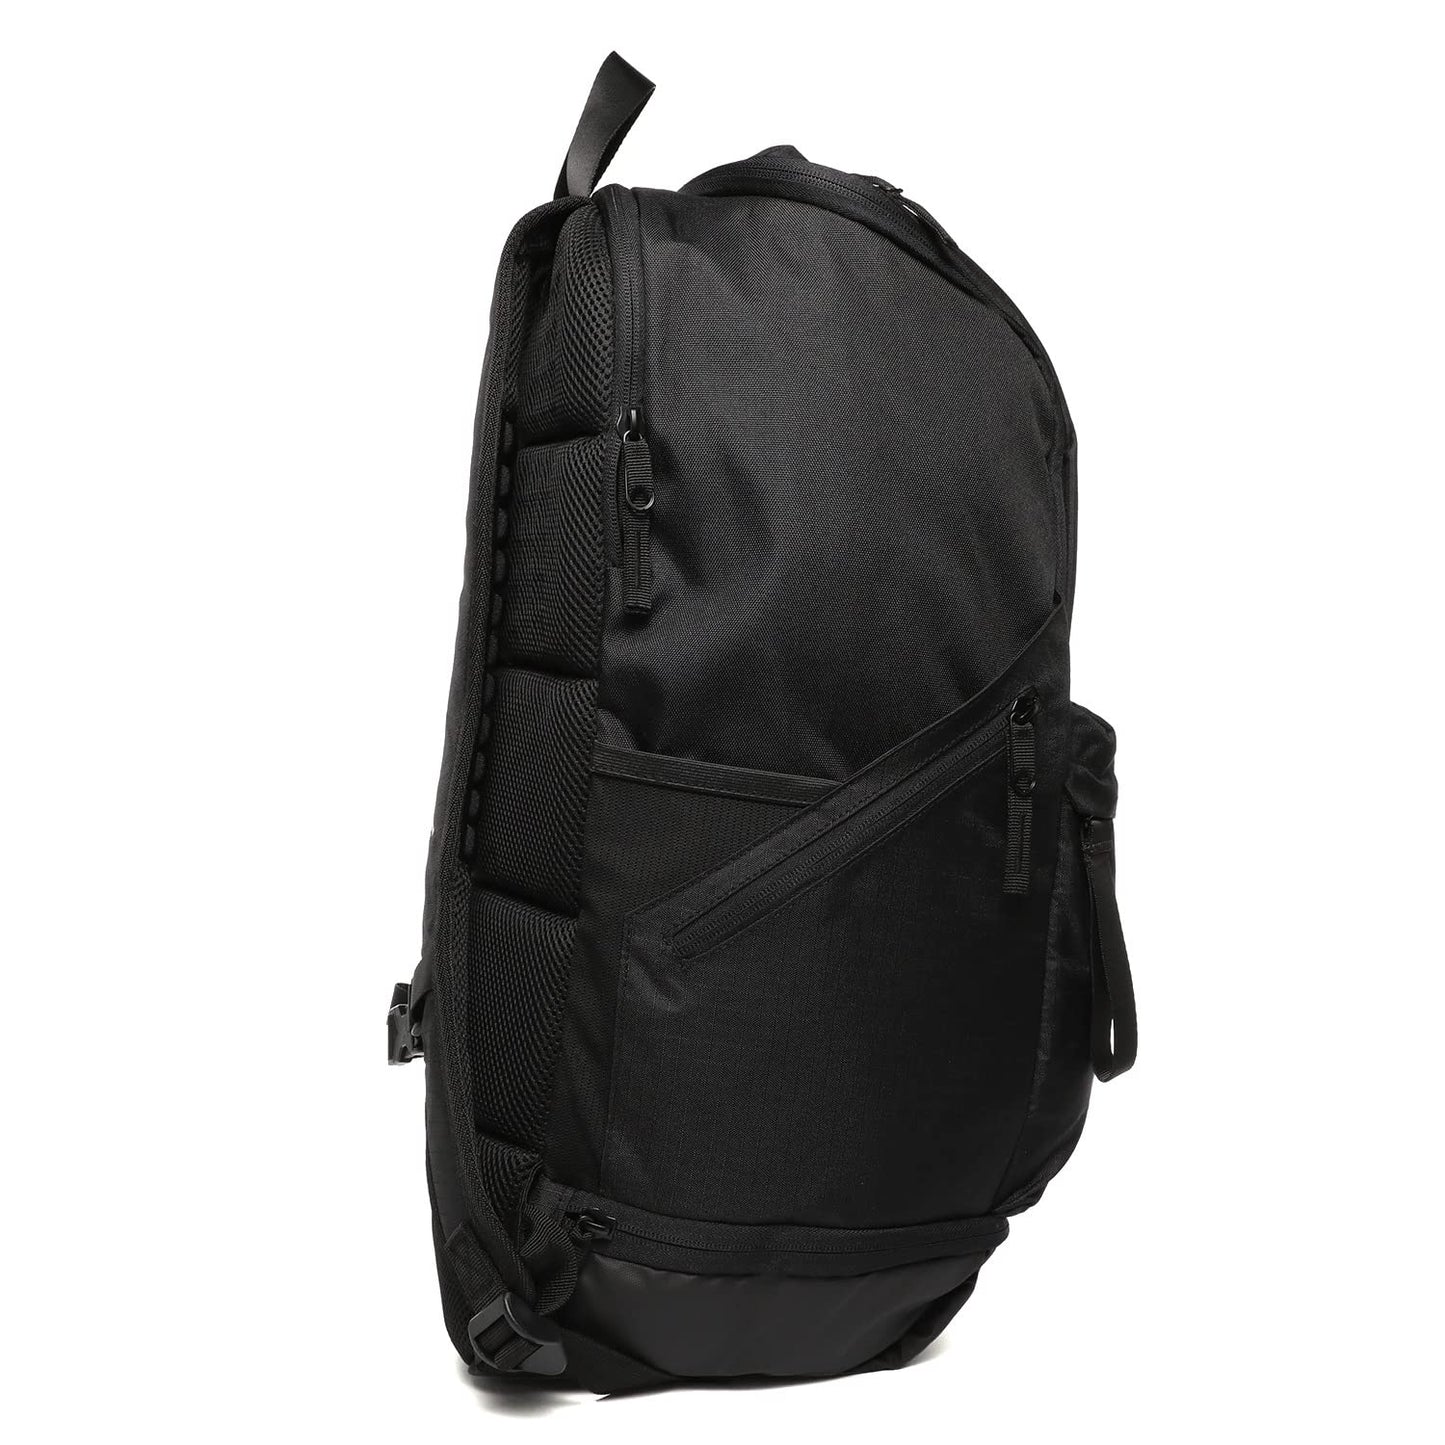 Image 5 of Zion Velocity Backpack (Big Kid)